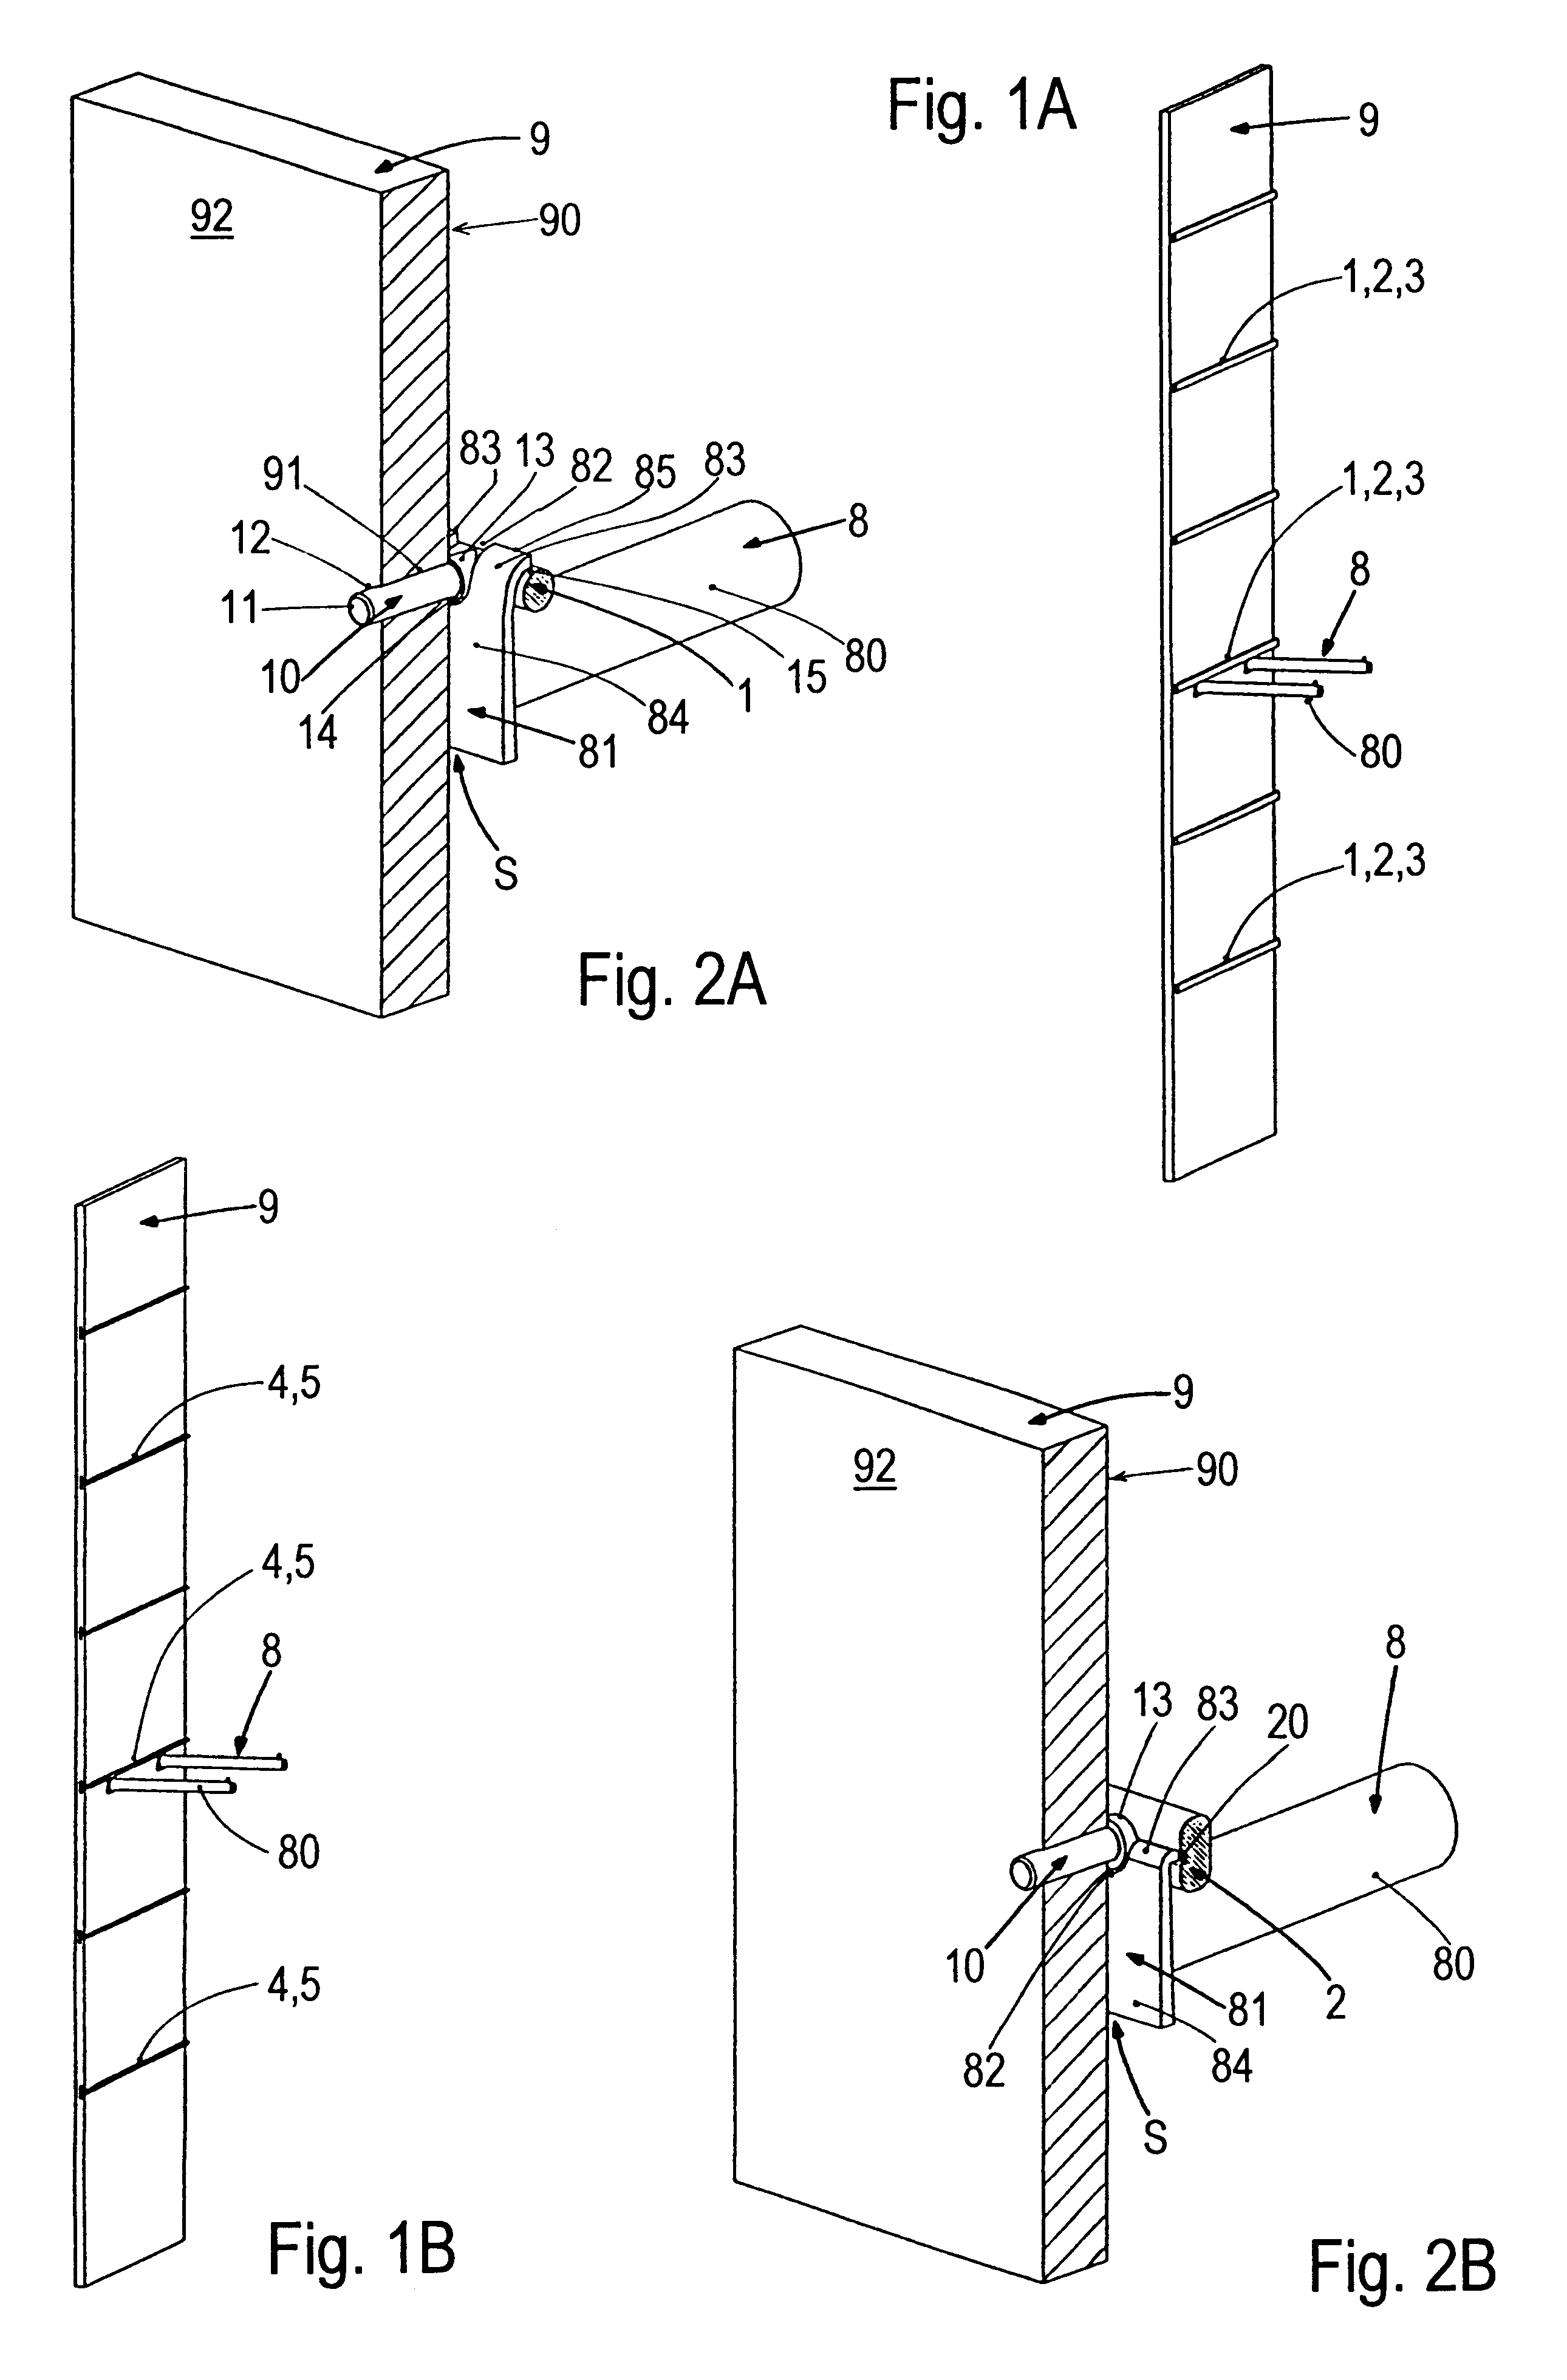 Display device for presentation of goods